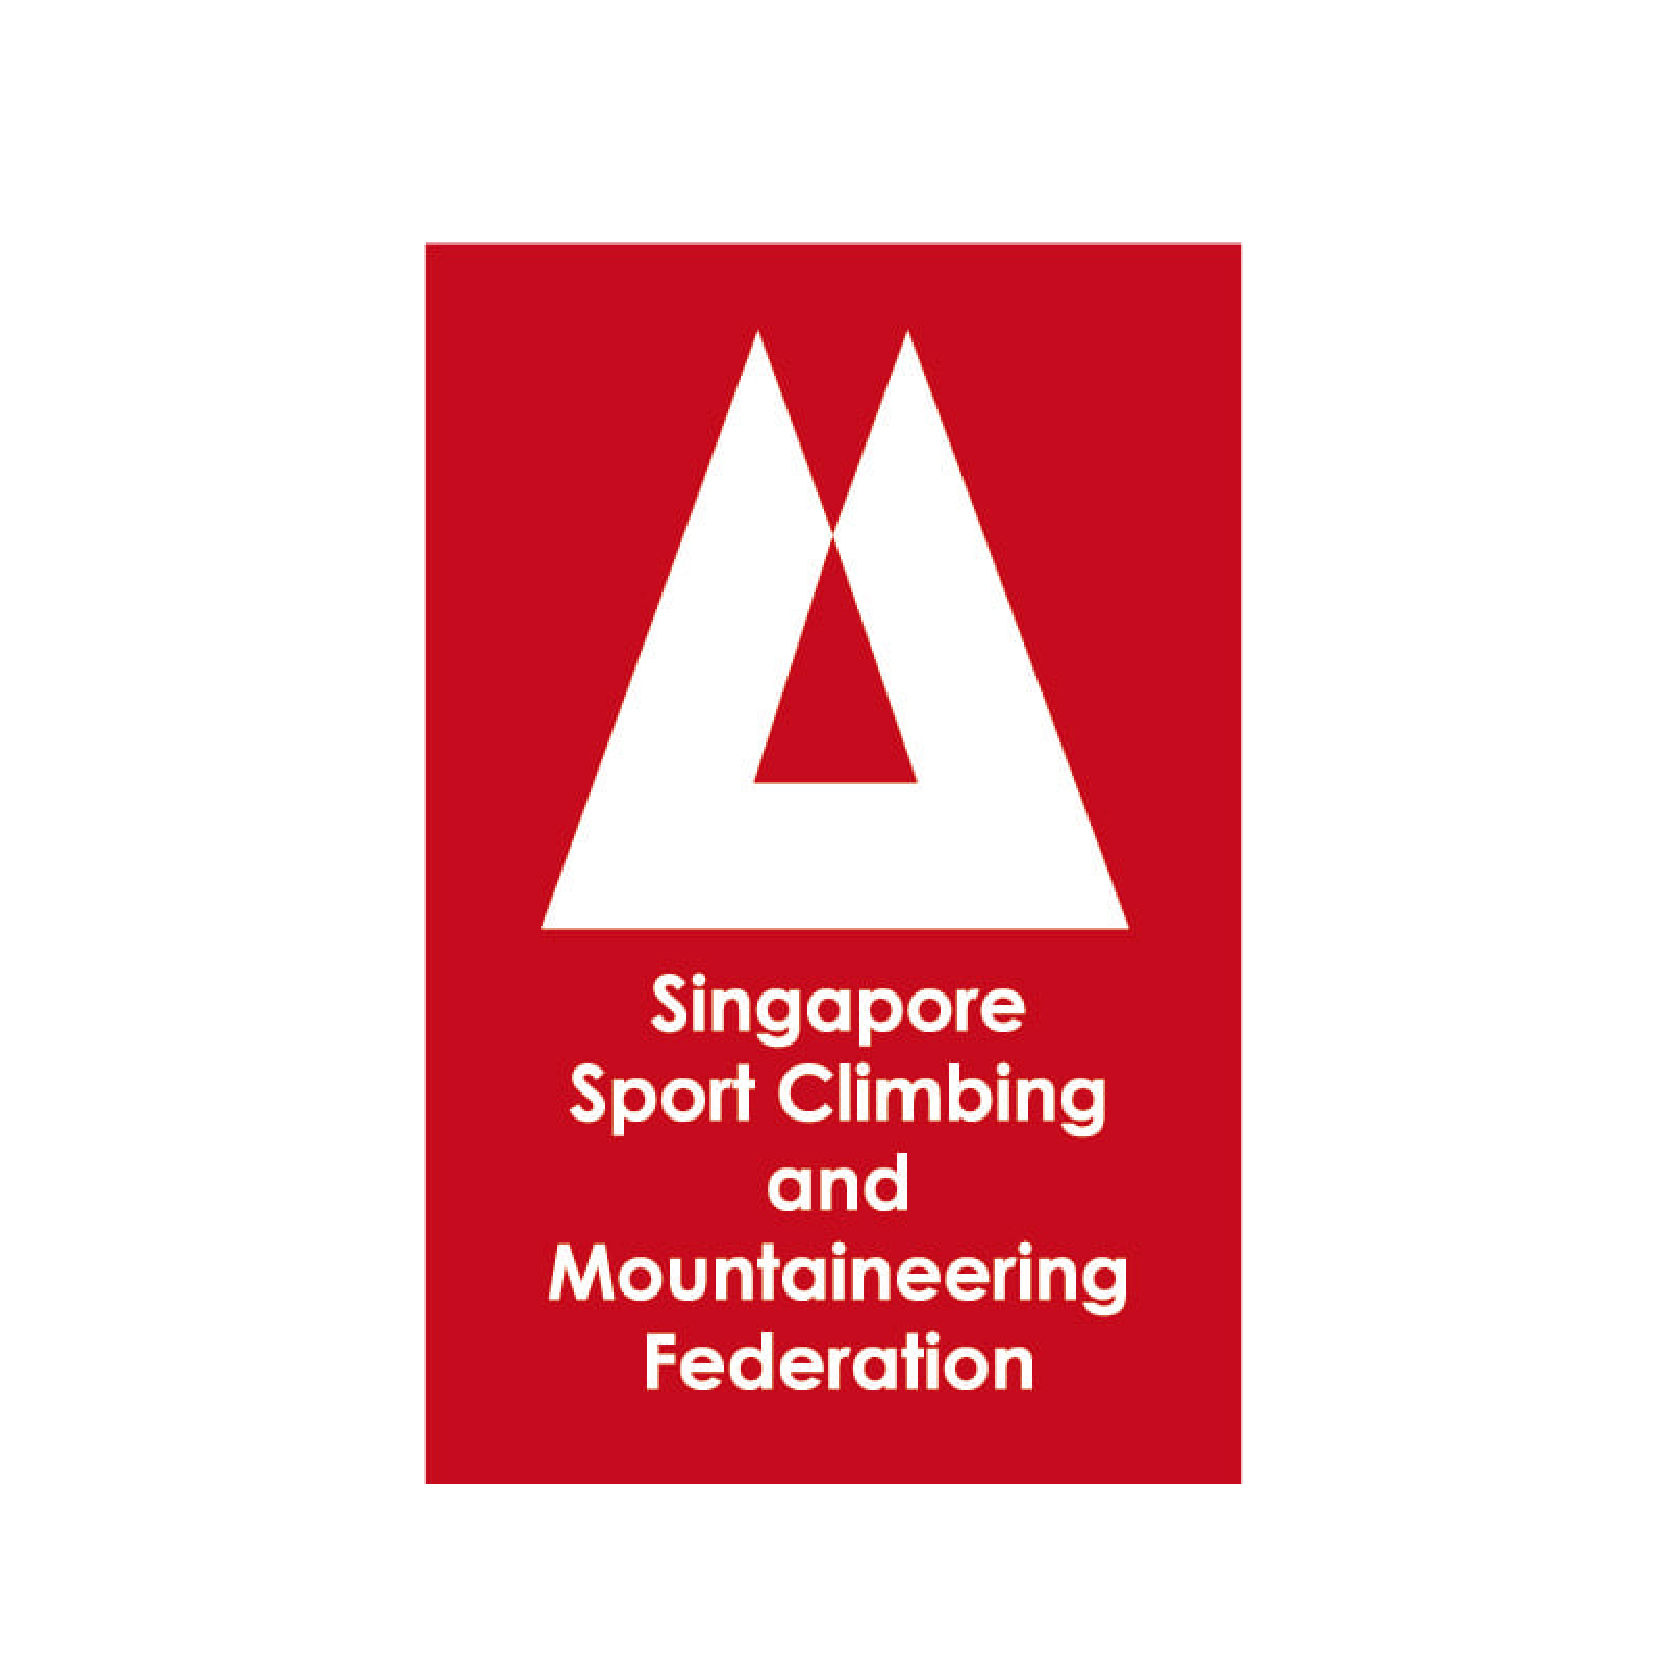 Singapore Sport Climbing and Mountaineering Federation